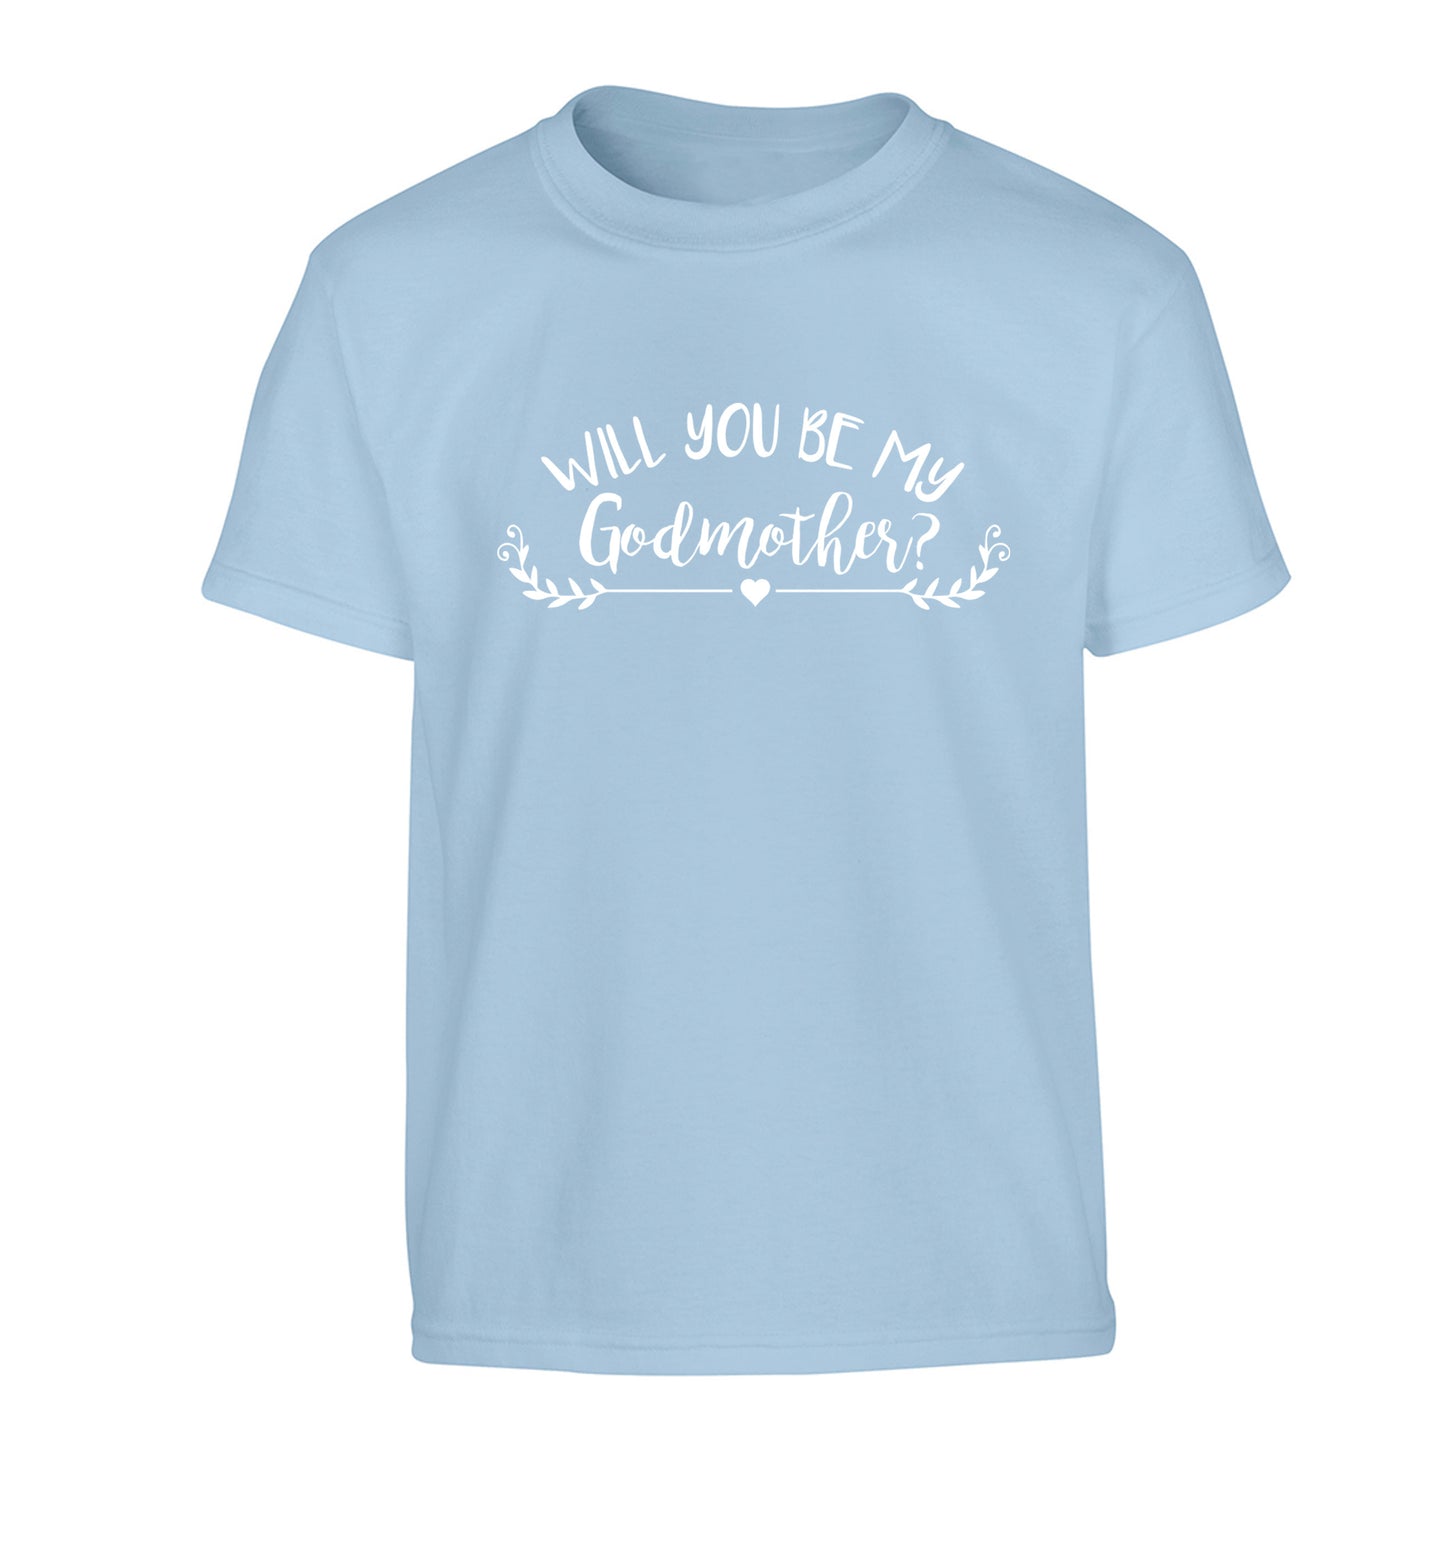 Will you be my godmother? Children's light blue Tshirt 12-14 Years